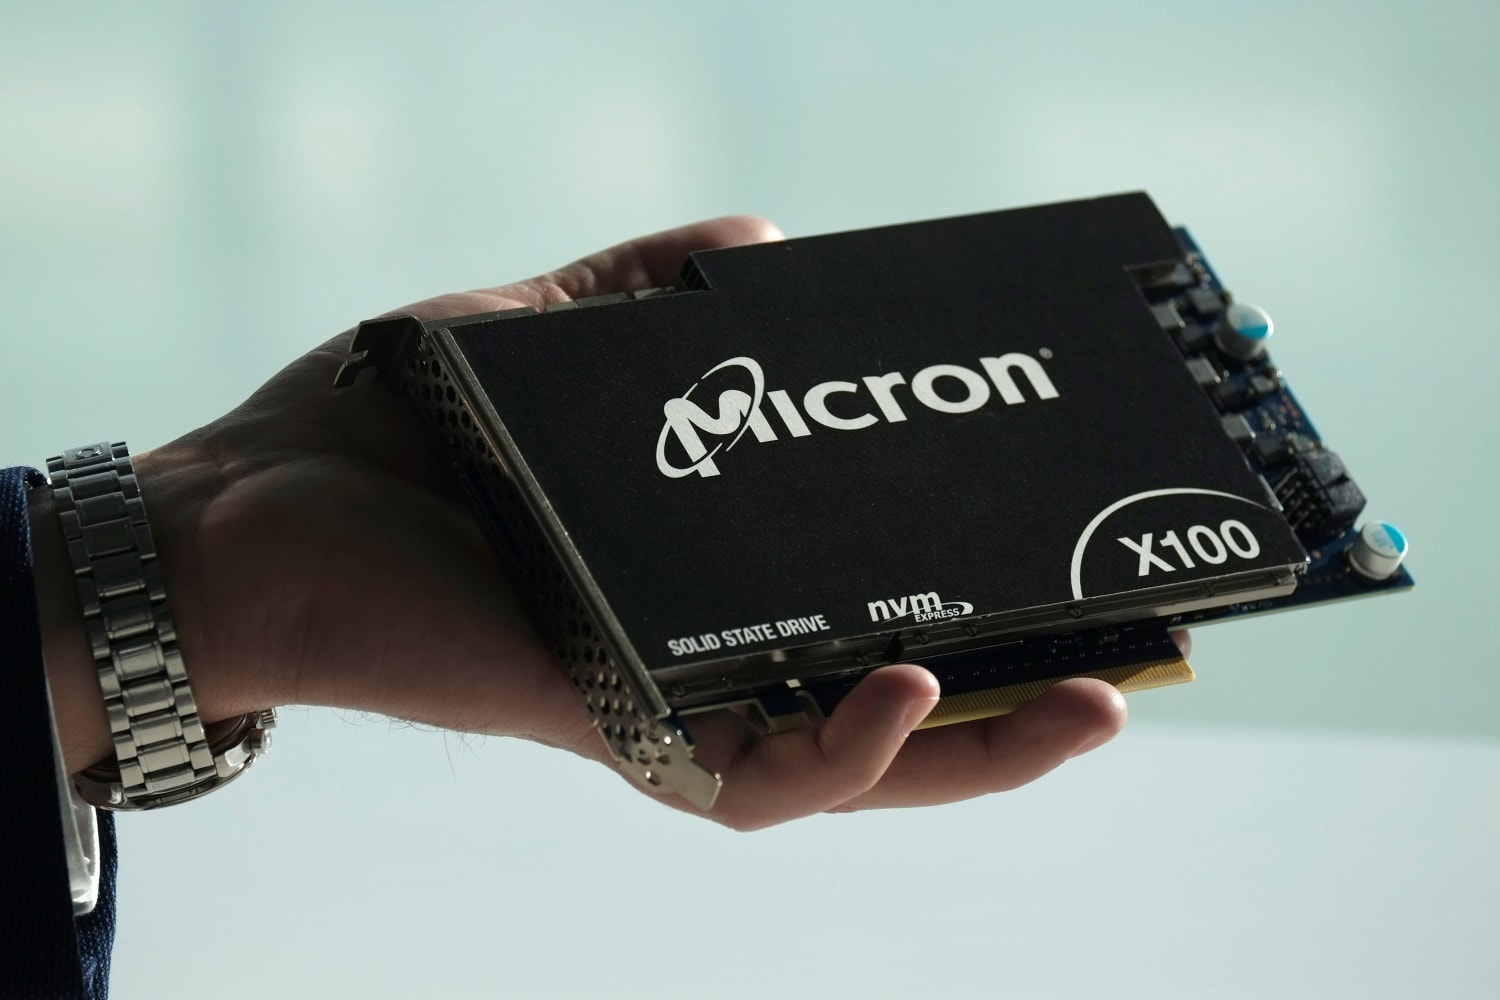 Micron, General Mills earnings, impeachment vote: 3 things to watch for in the markets on Wednesday